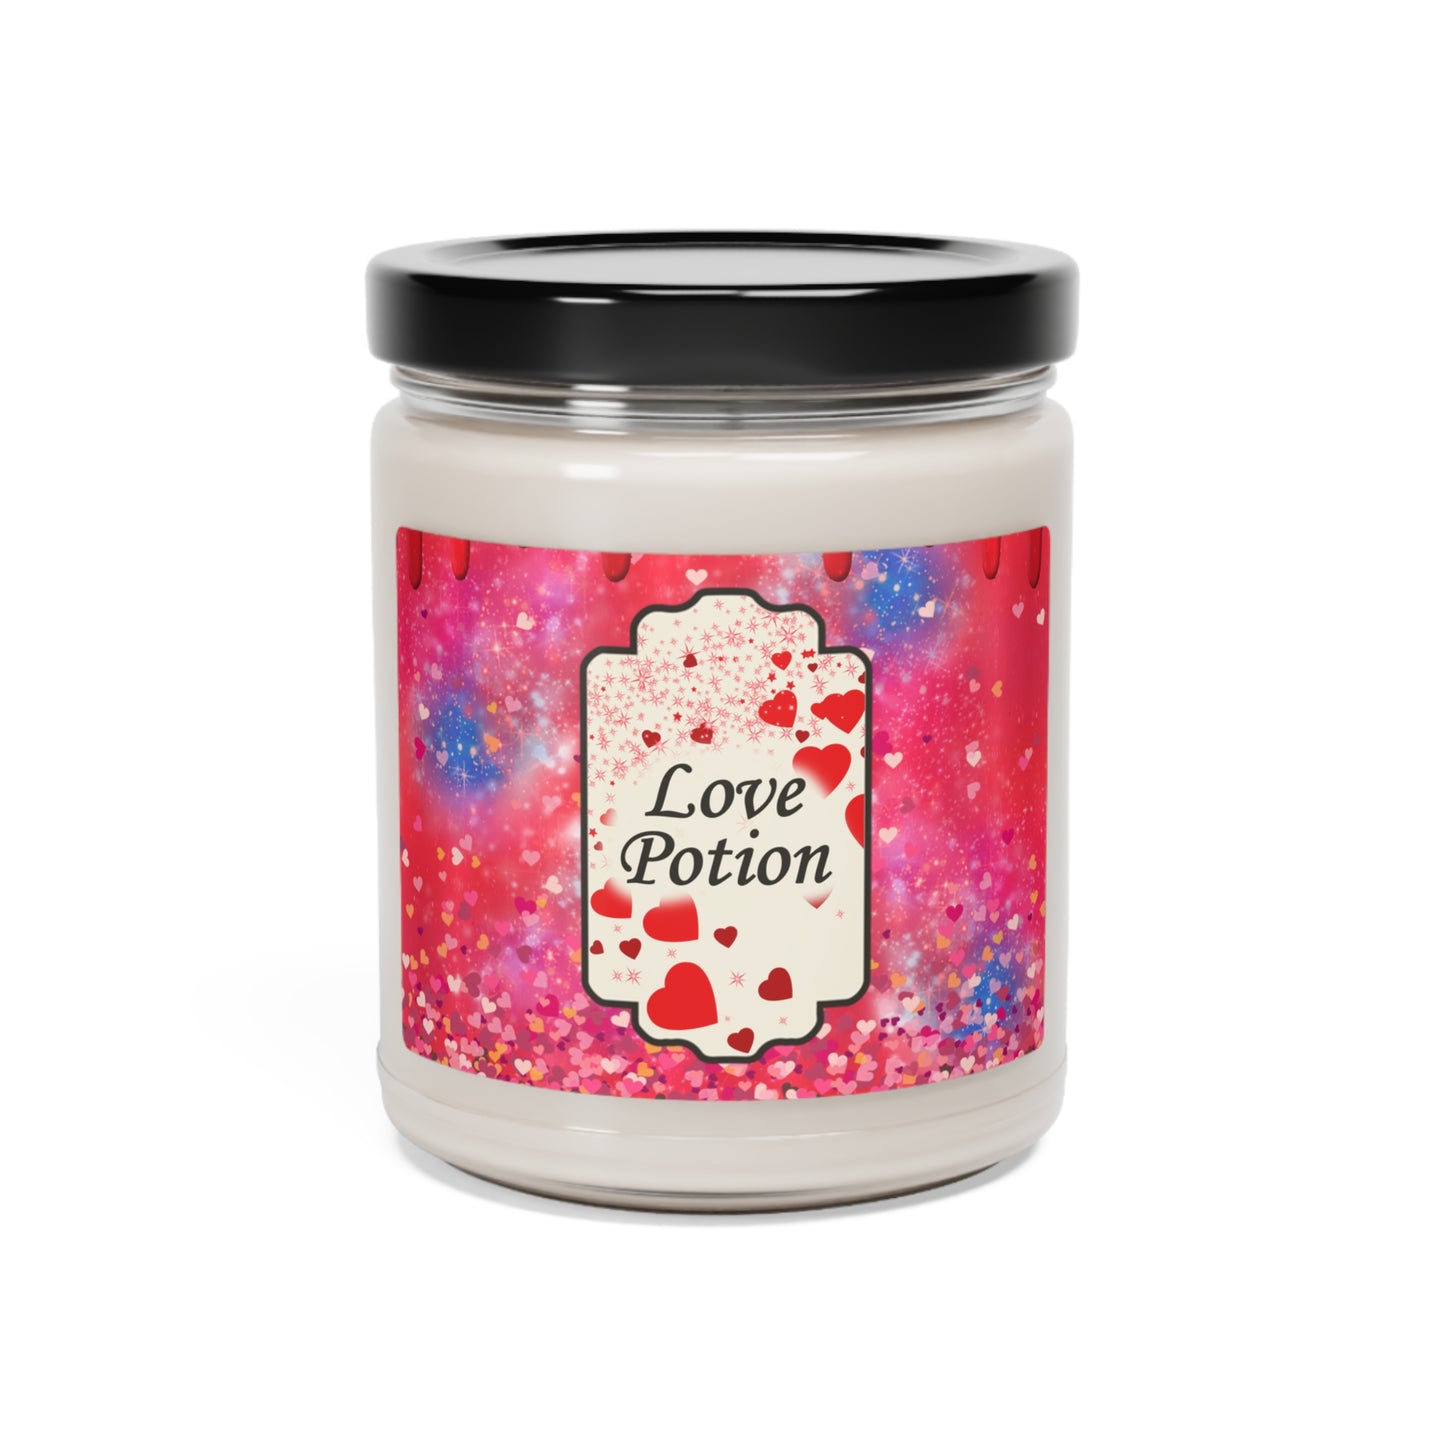 Love Potion Scented Soy Candle | Valentines Gift | Gifts for Her | Scented Candle | Gifts